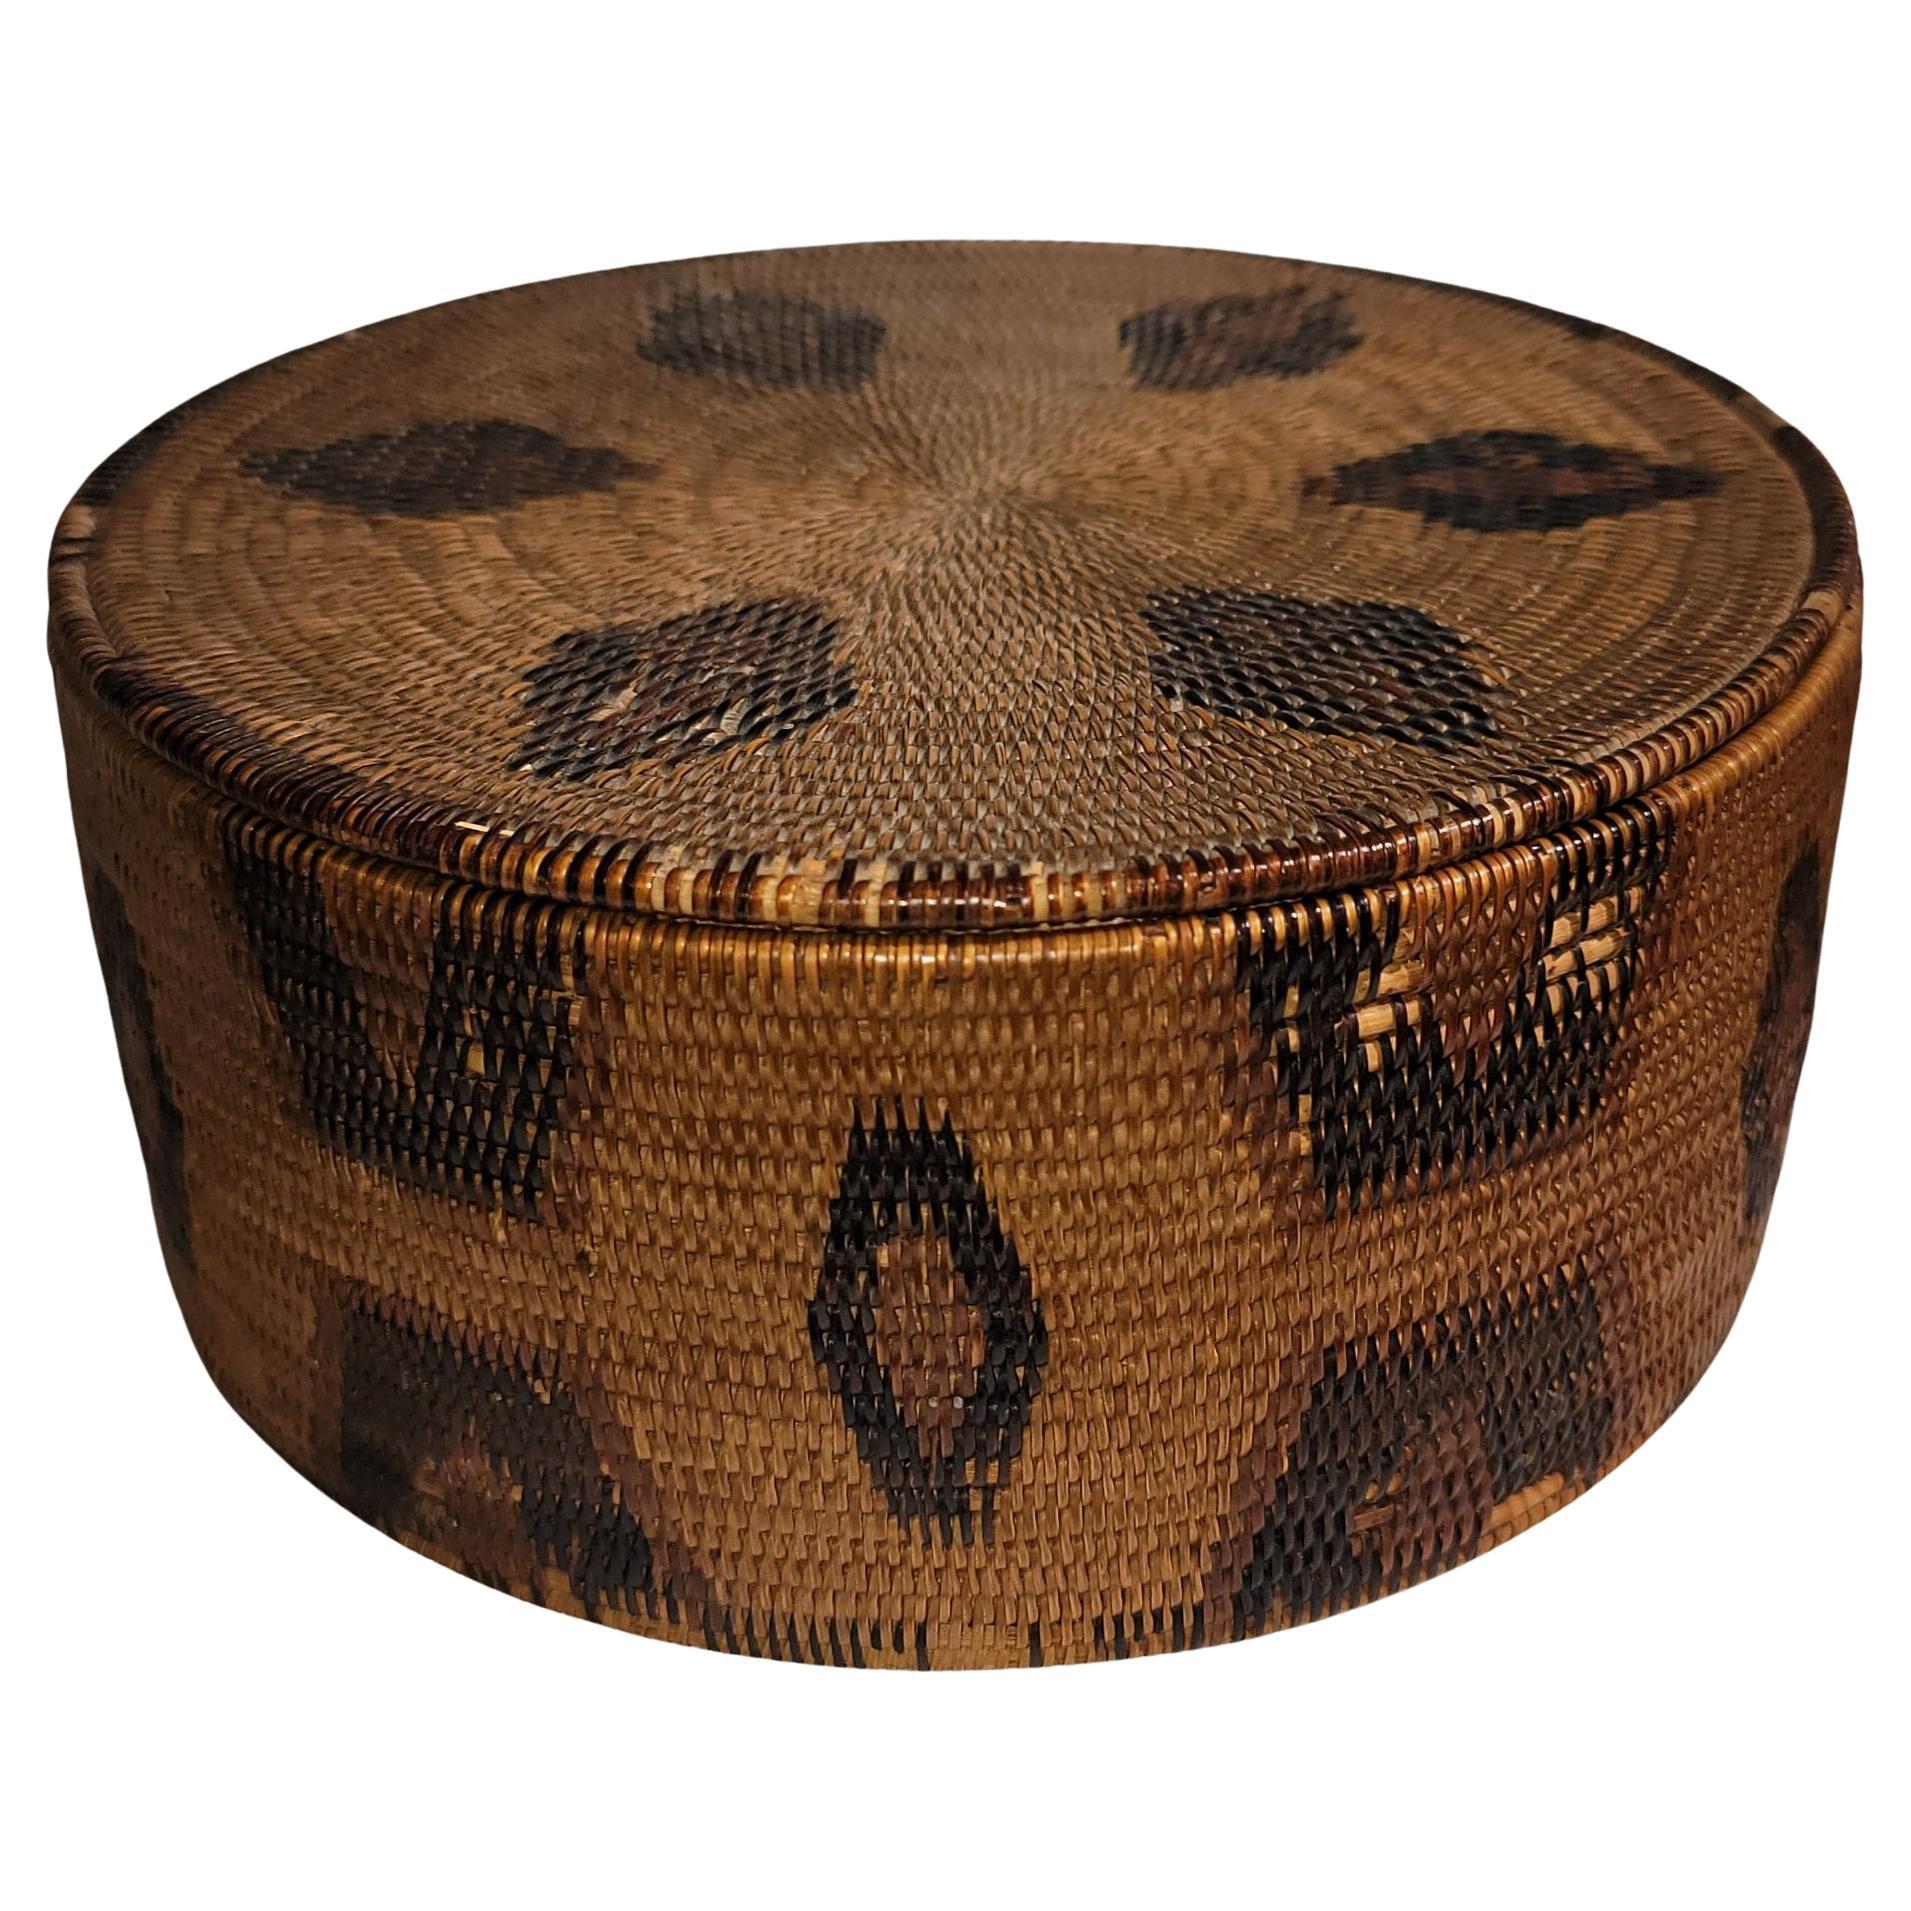 Early 19thc American Indian Lidded Basket For Sale